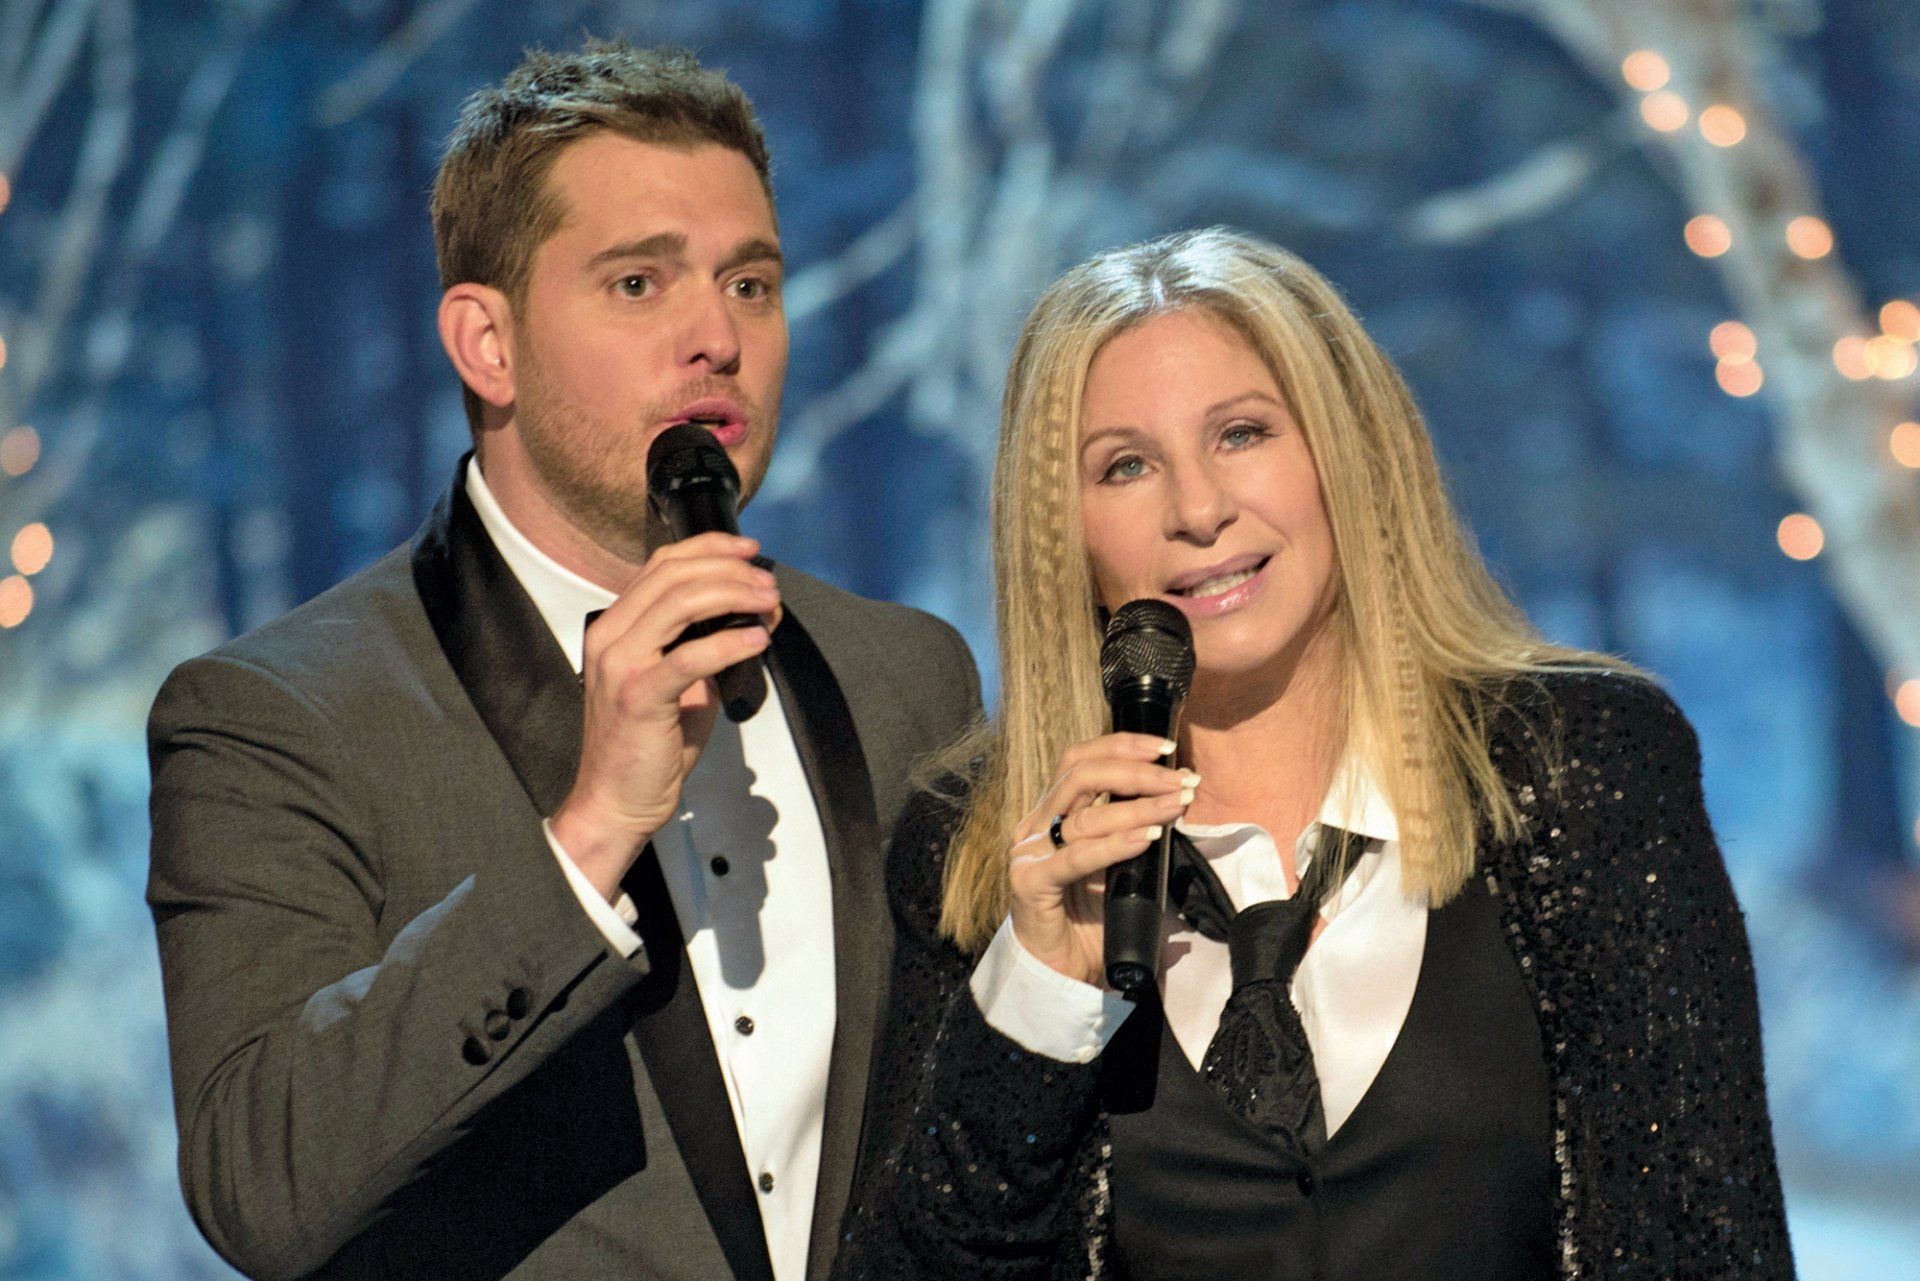 Michael Bublé and Barbra Streisand sing a duet on his 2014 Christmas special.